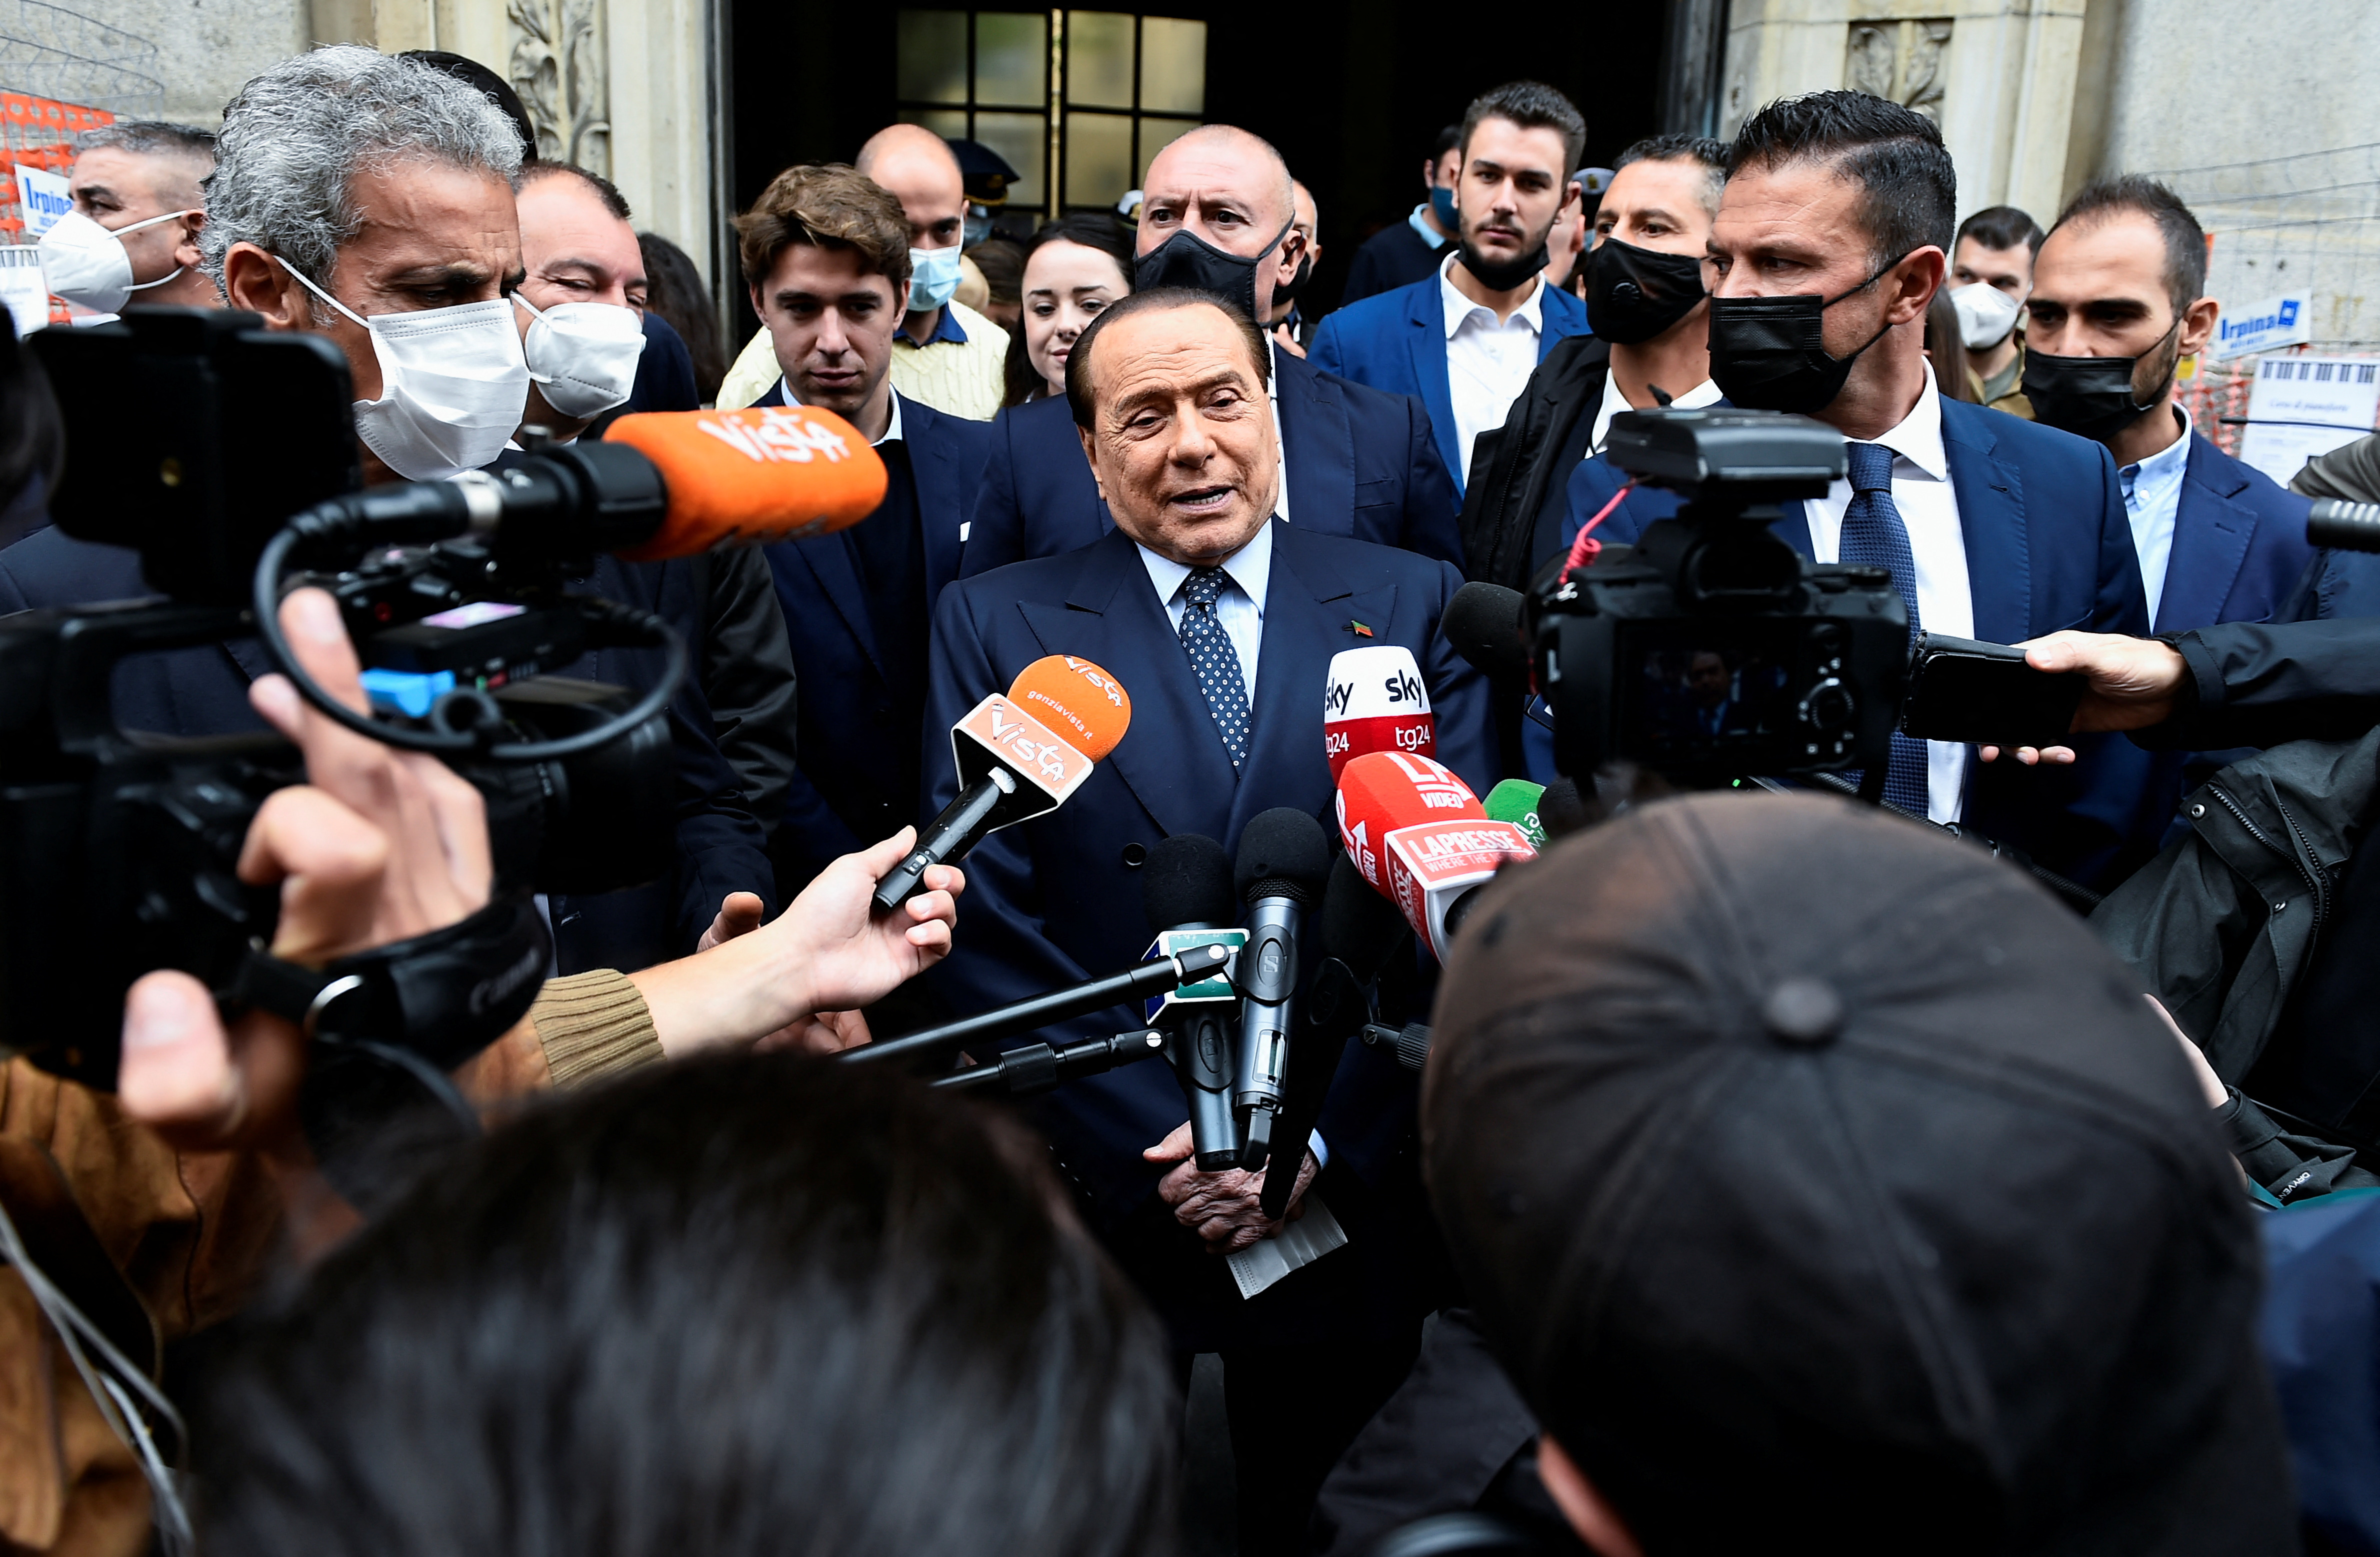 Italy's former Prime Minister Silvio Berlusconi speaks to members of the media after he voted in Italian elections for mayors and councillors, in Milan, Italy, October 3, 2021. REUTERS/Flavio Lo Scalzo